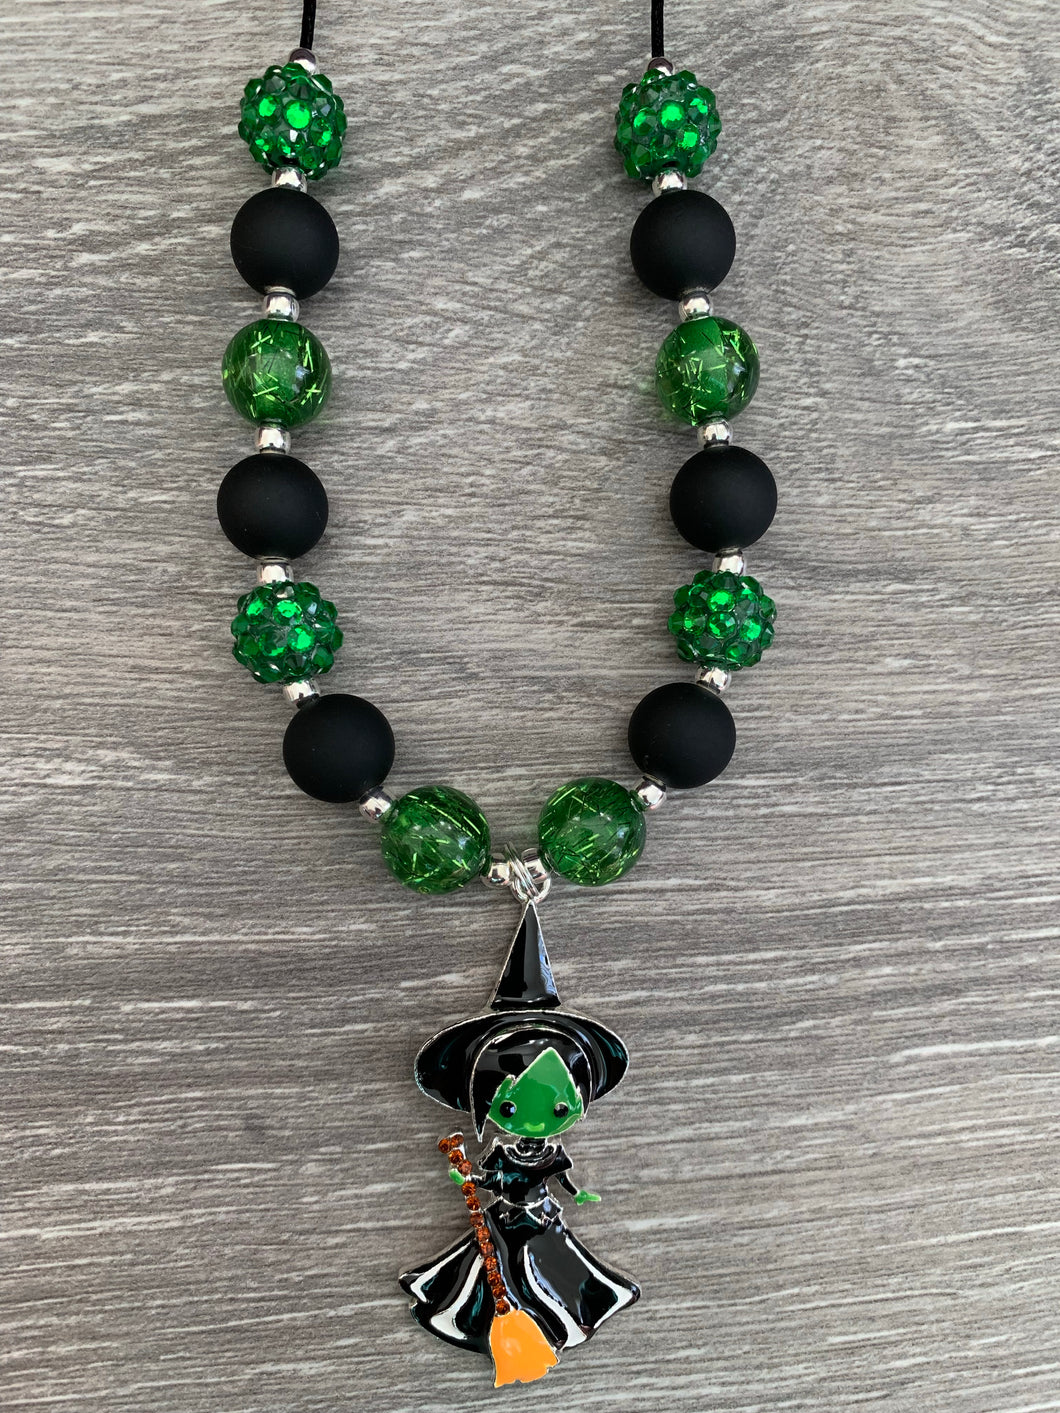 Wizard of Oz- Wicked Witch pendant